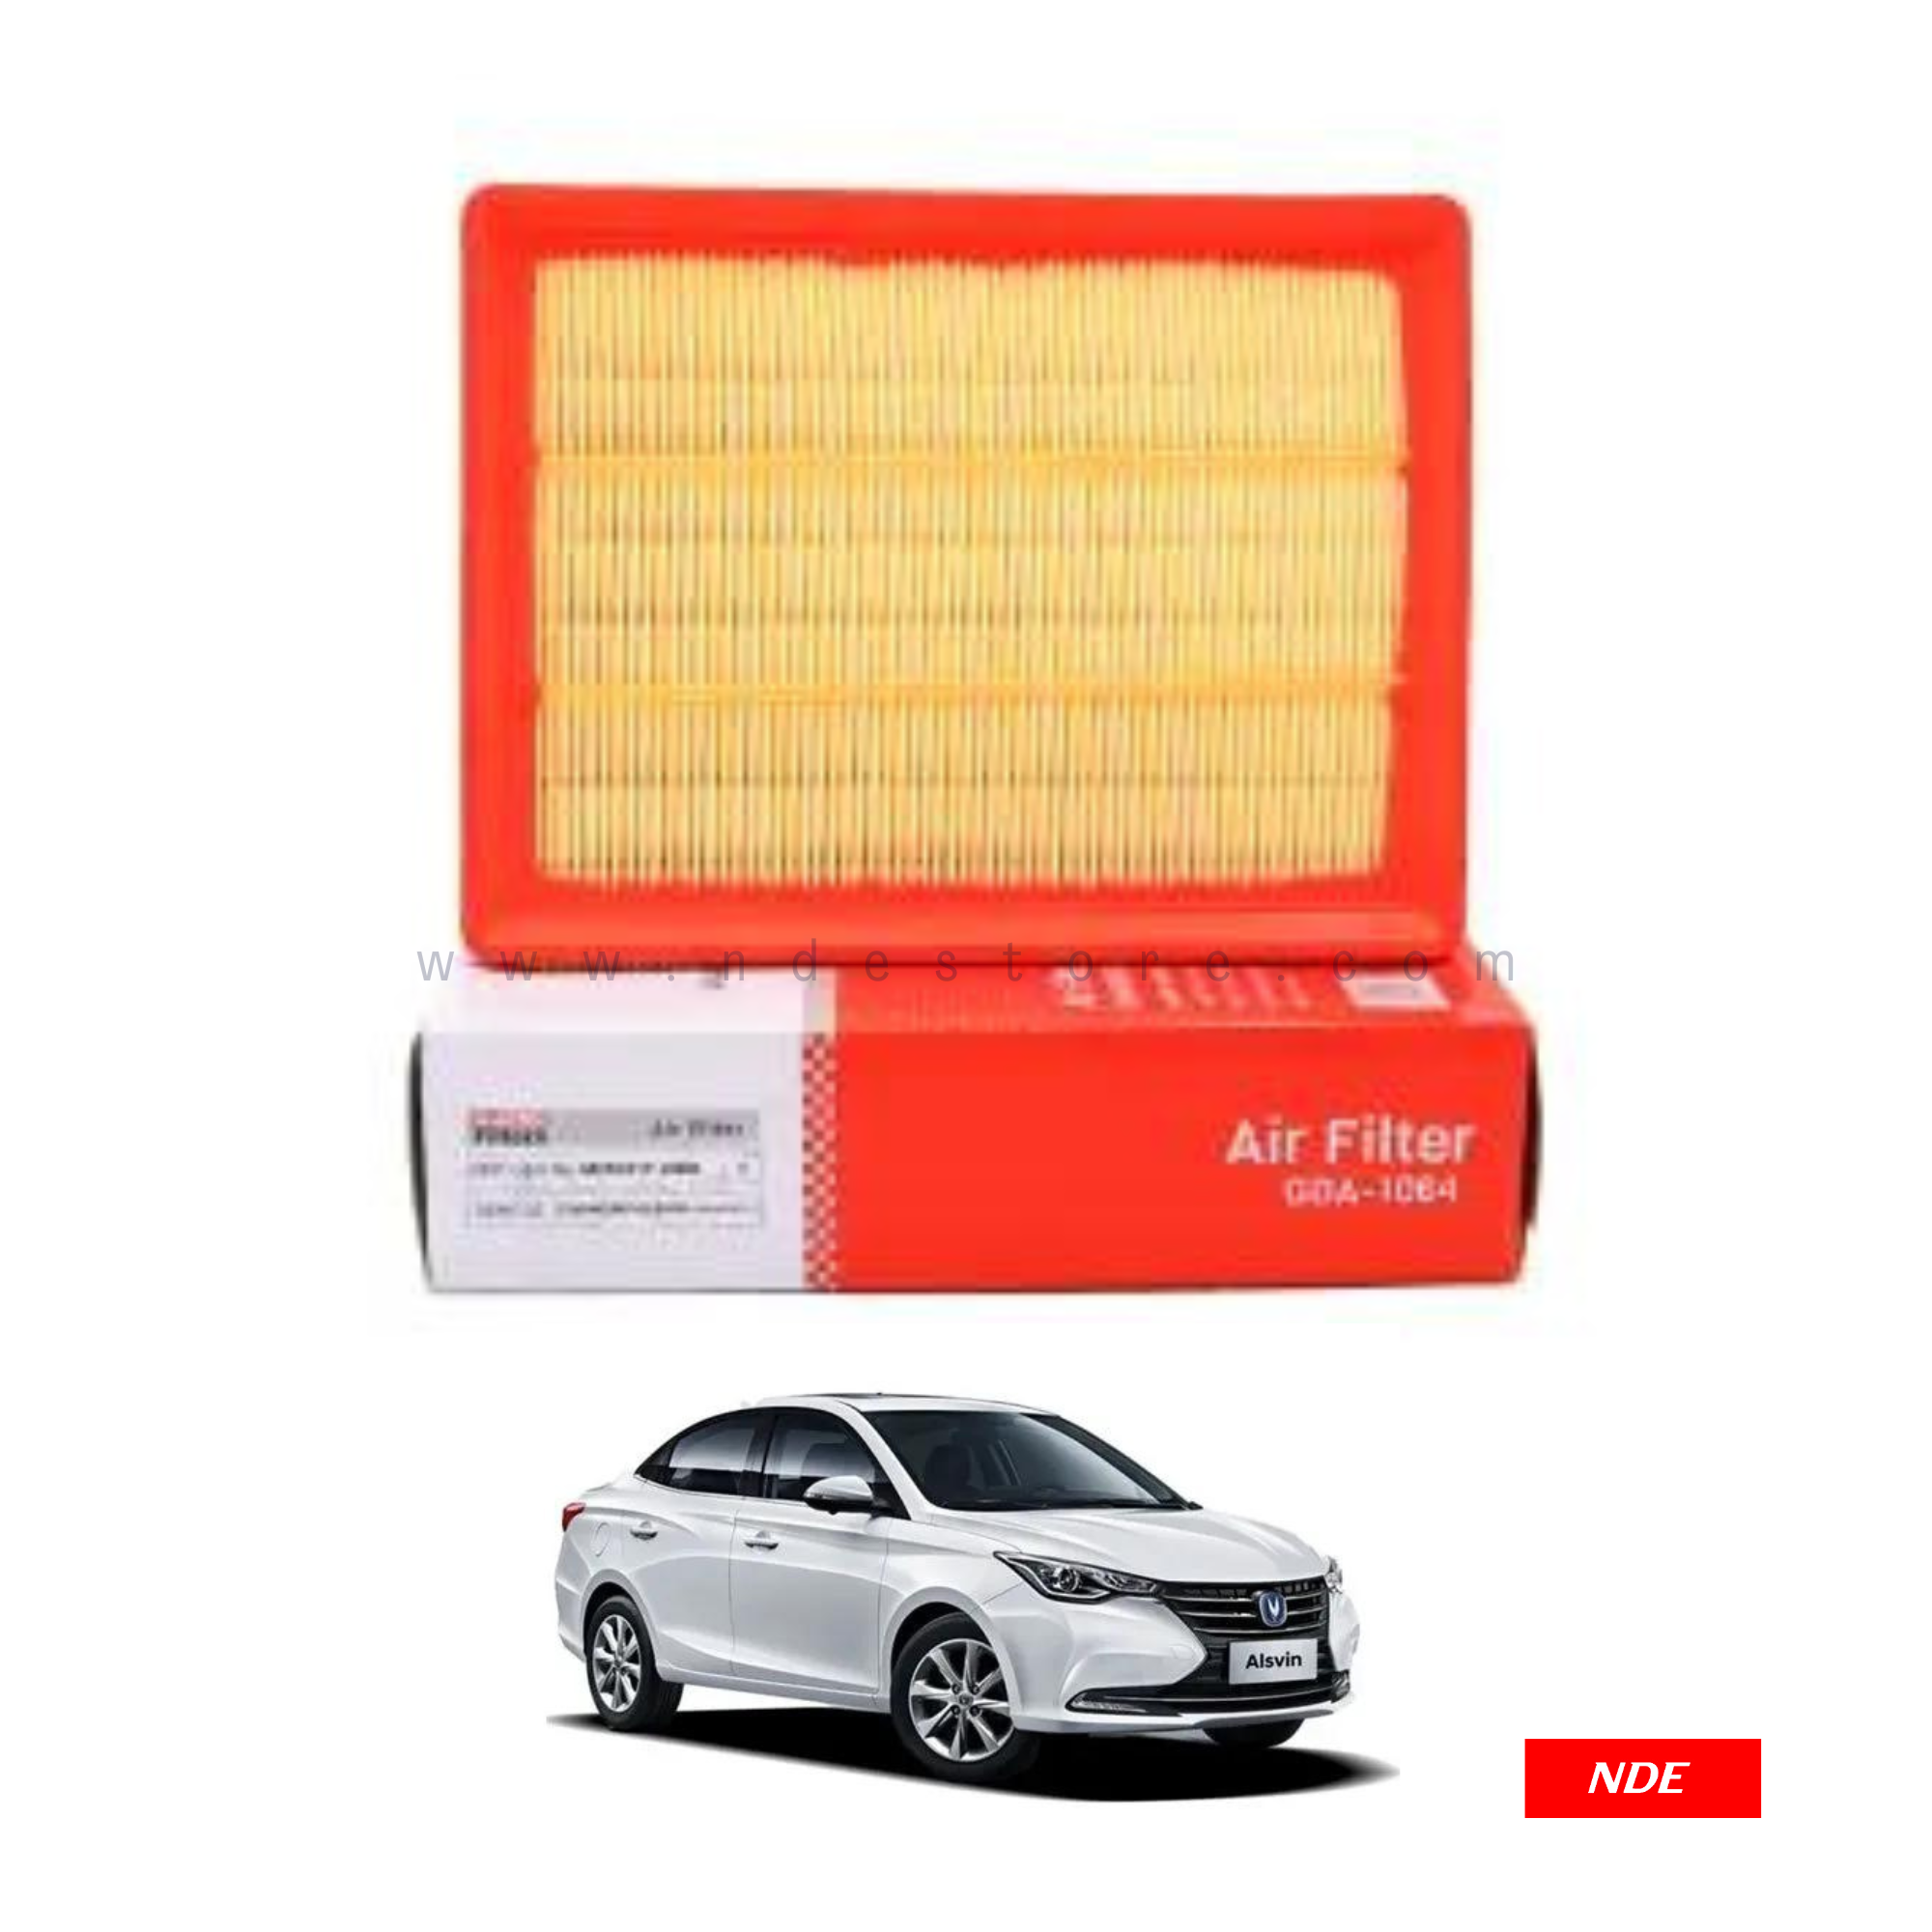 AIR FILTER ELEMENT SUB ASSY FOR CHANGAN ALSVIN